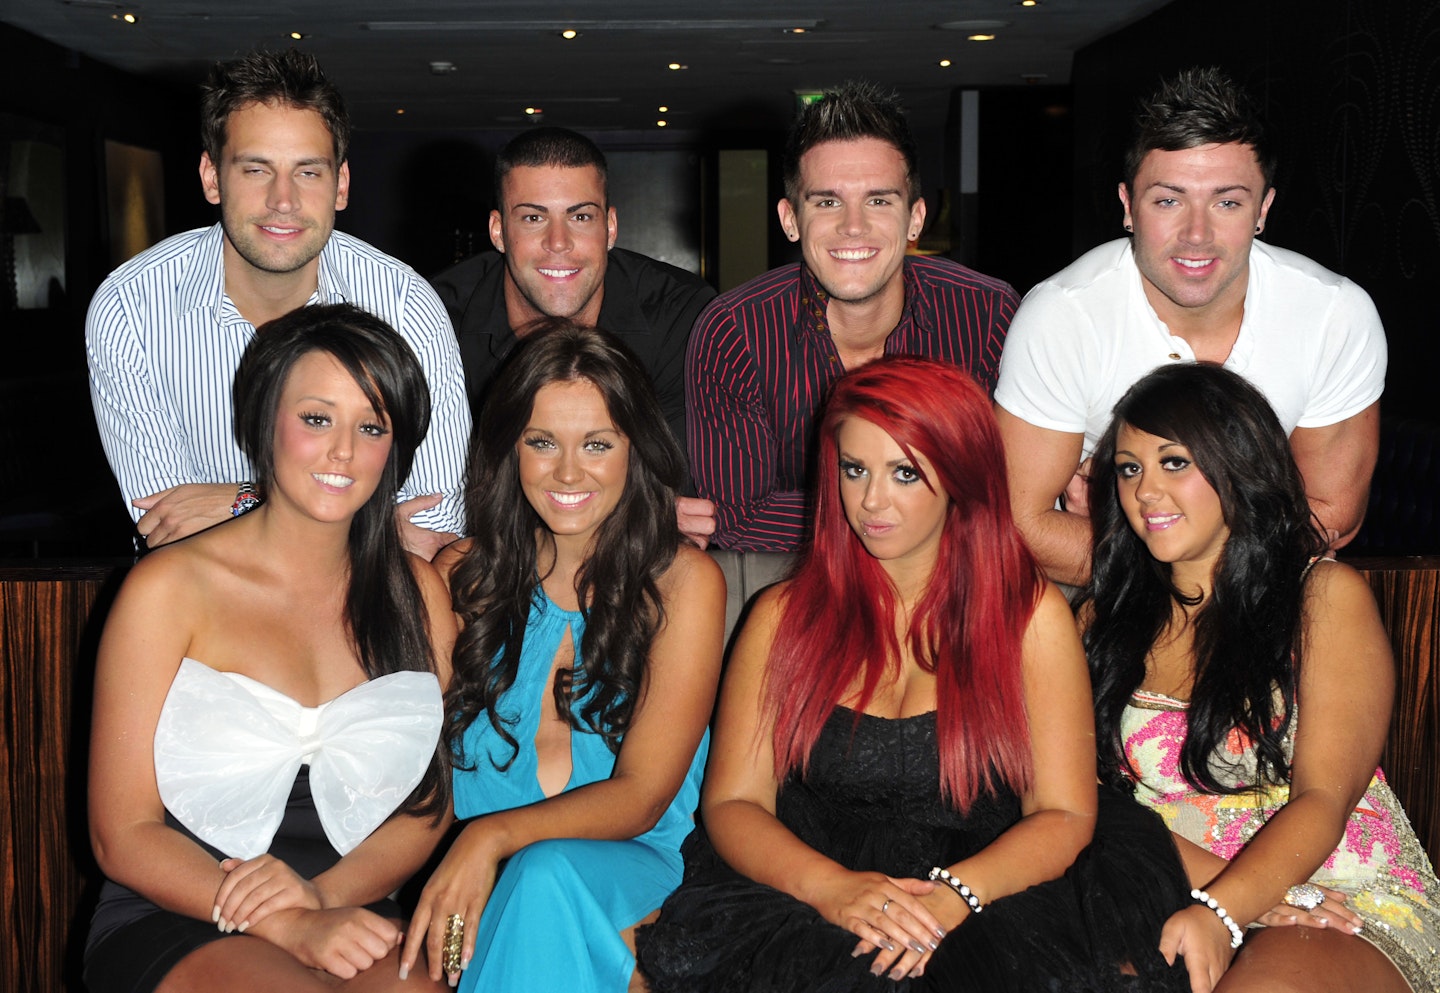 Vicky Pattison with her original Geordie Shore castmates